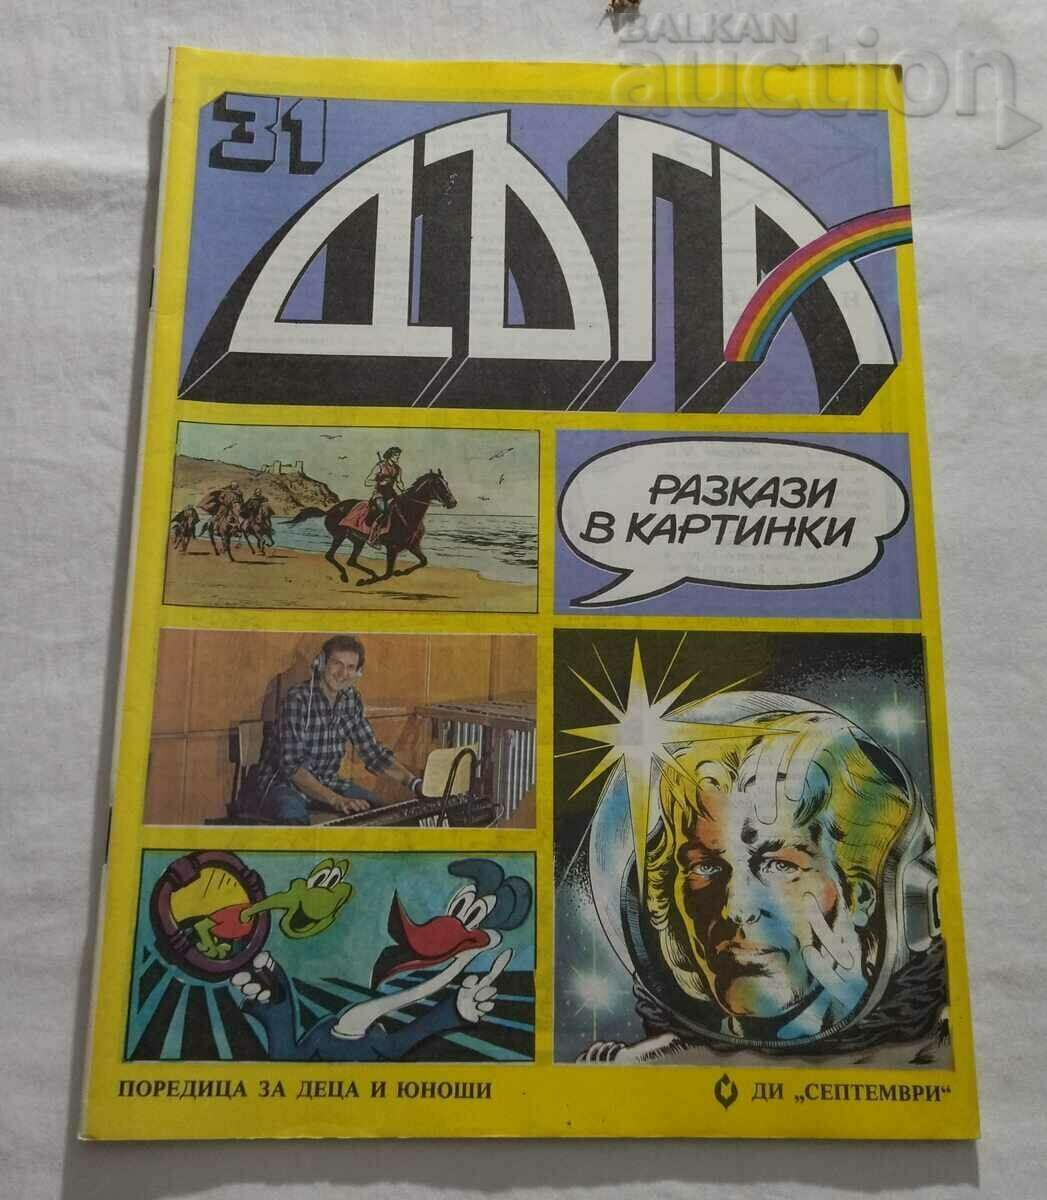 RAINBOW No. 31 1988 TANGRA POSTER MAGAZINE FOR CHILDREN AND YOUNG PEOPLE